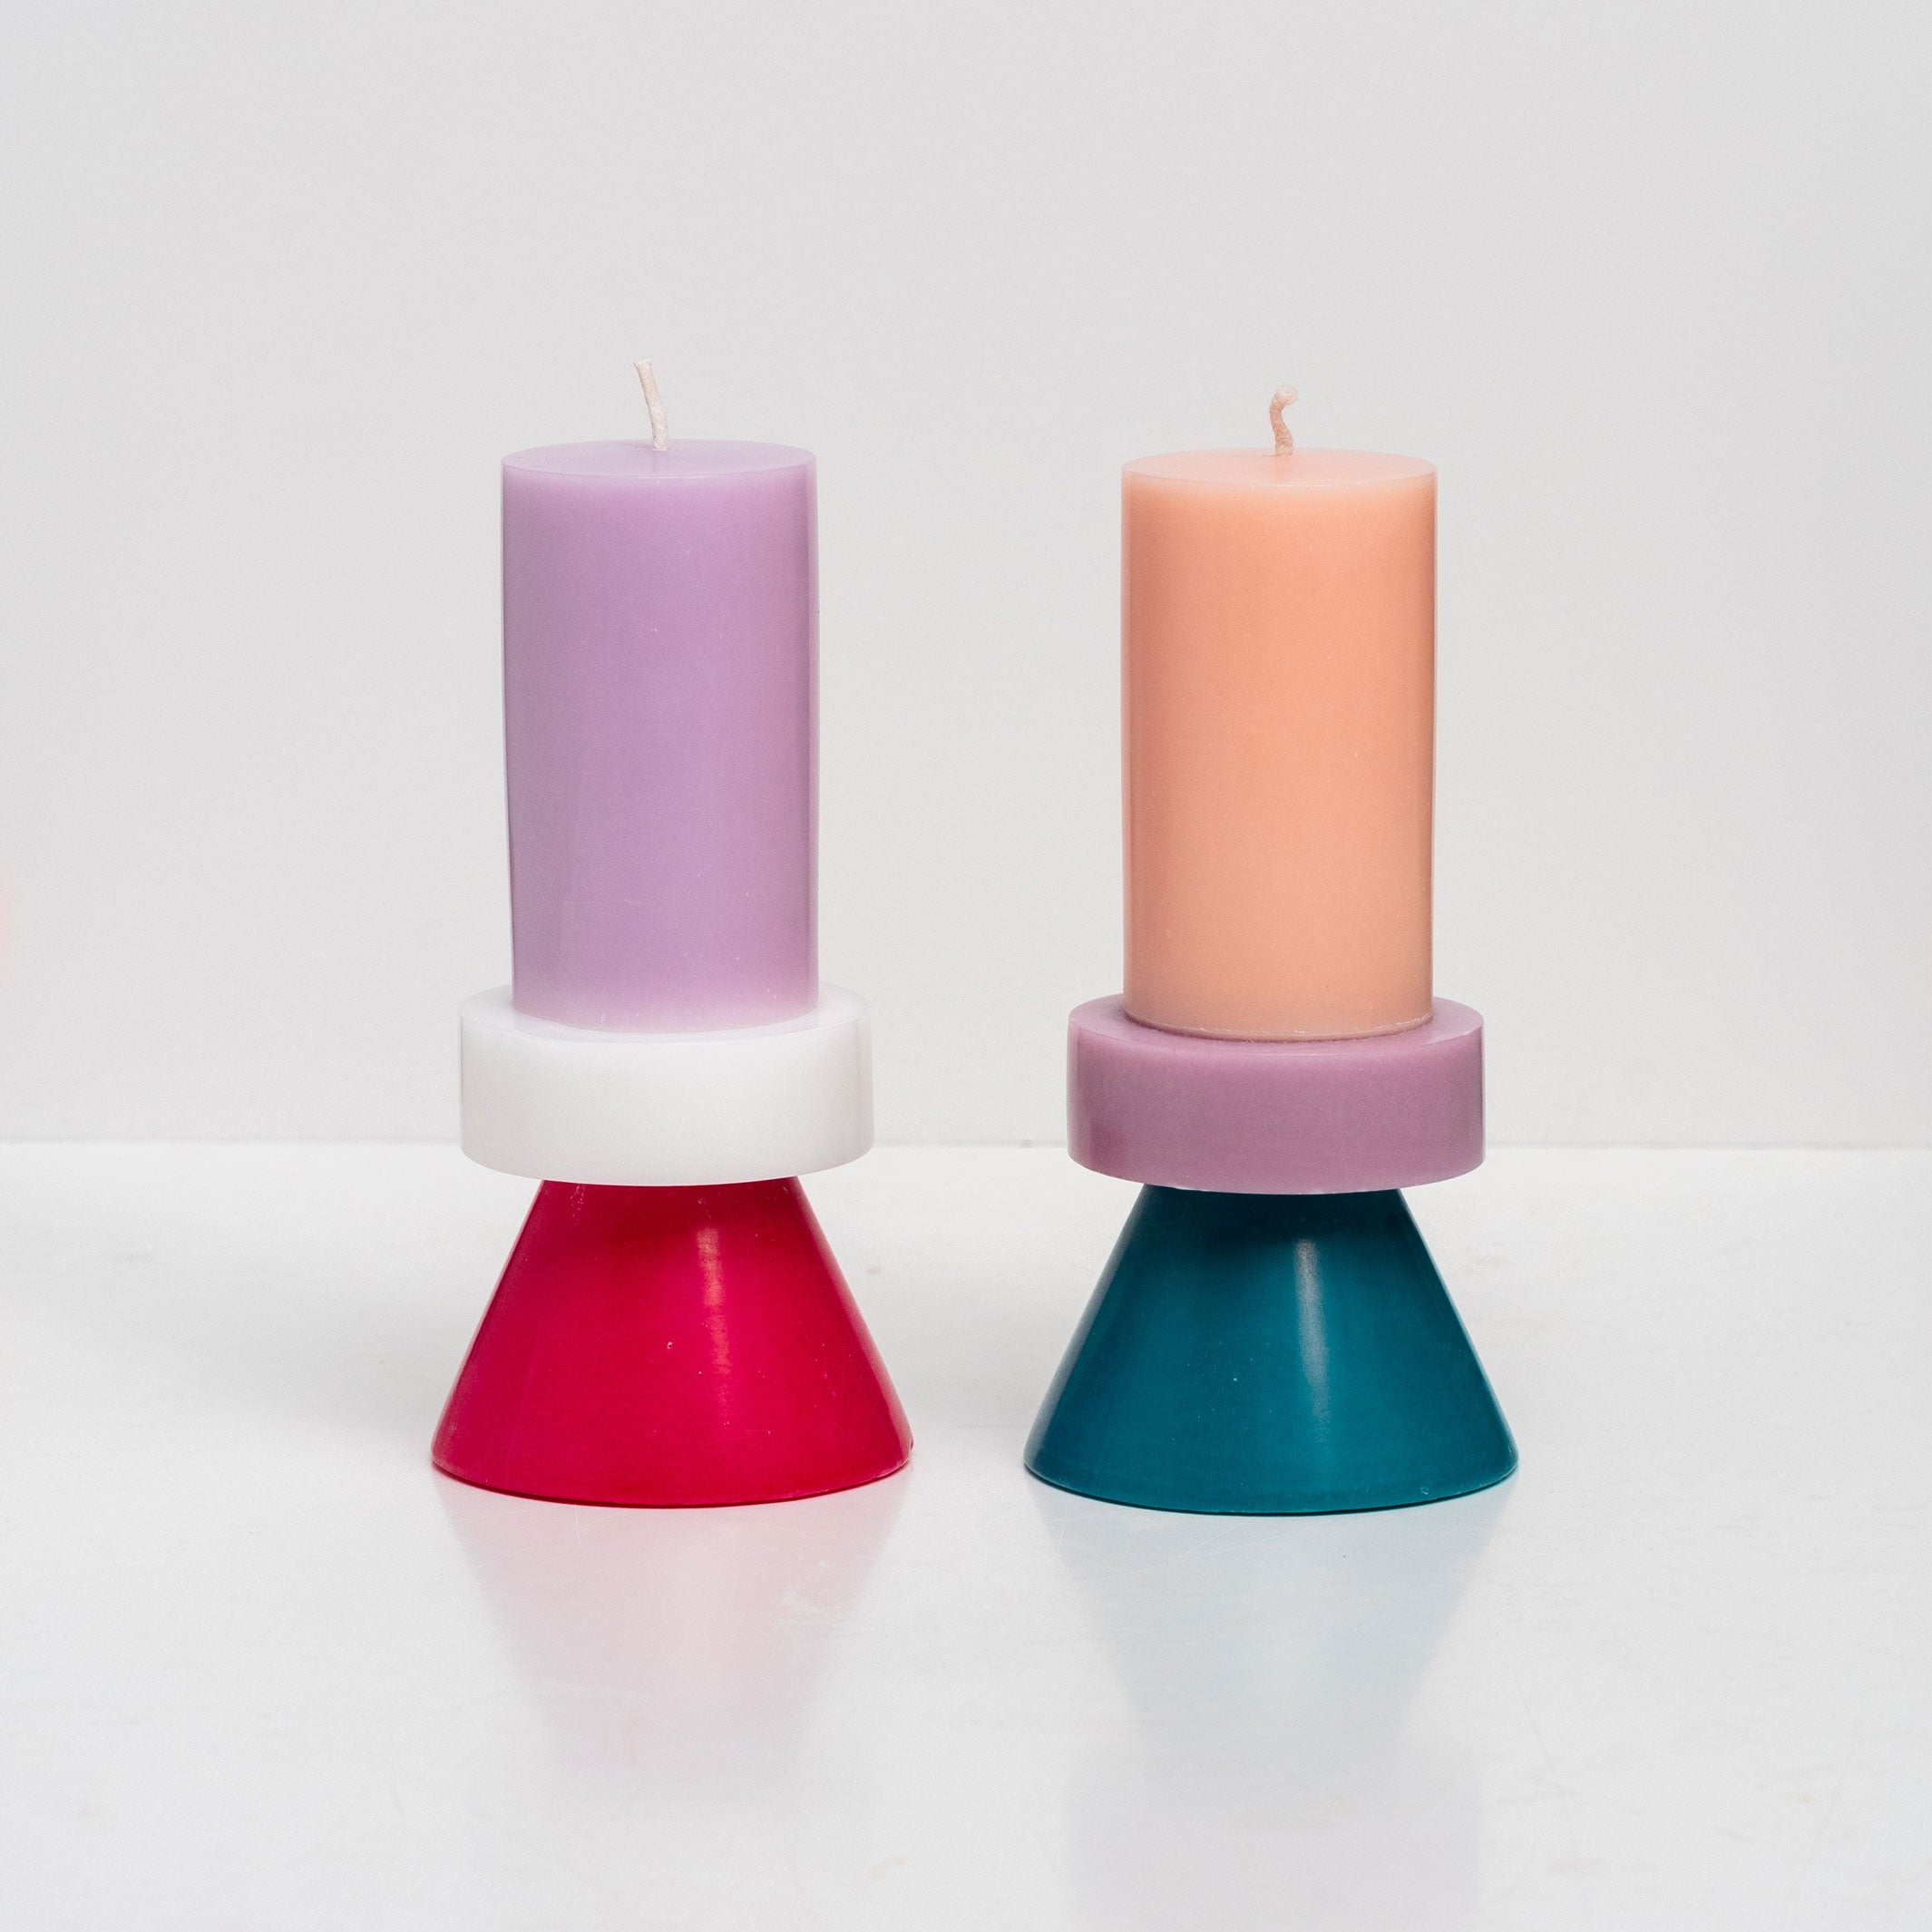 STACK CANDLE TALL | KERZE in Farben blush-pastelpurple-teal | 30 Std. Brenndauer | YOD AND CO